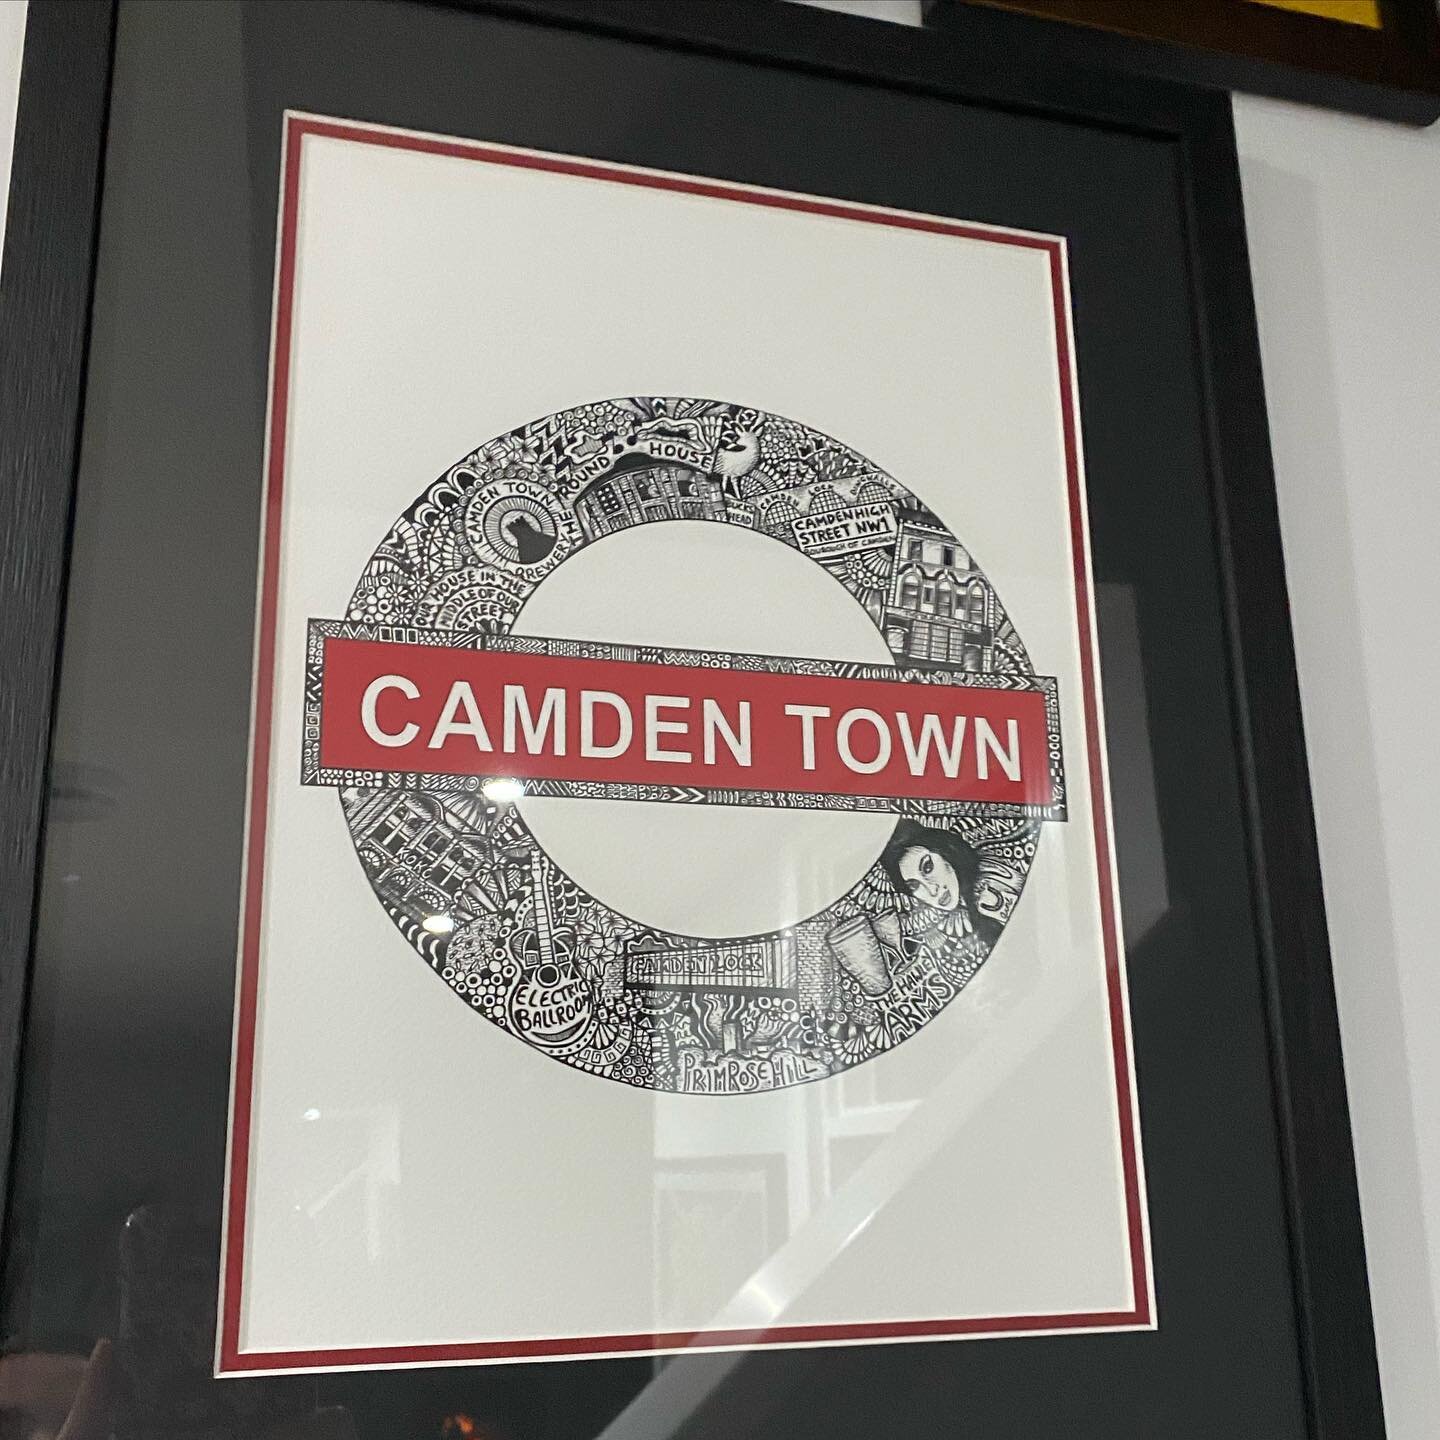 Can&rsquo;t beat the feeling of seeing your work in someone&rsquo;s home 🏡 #pretendingtobeastar #goodtaste #camdentownlondon #jerseyliving